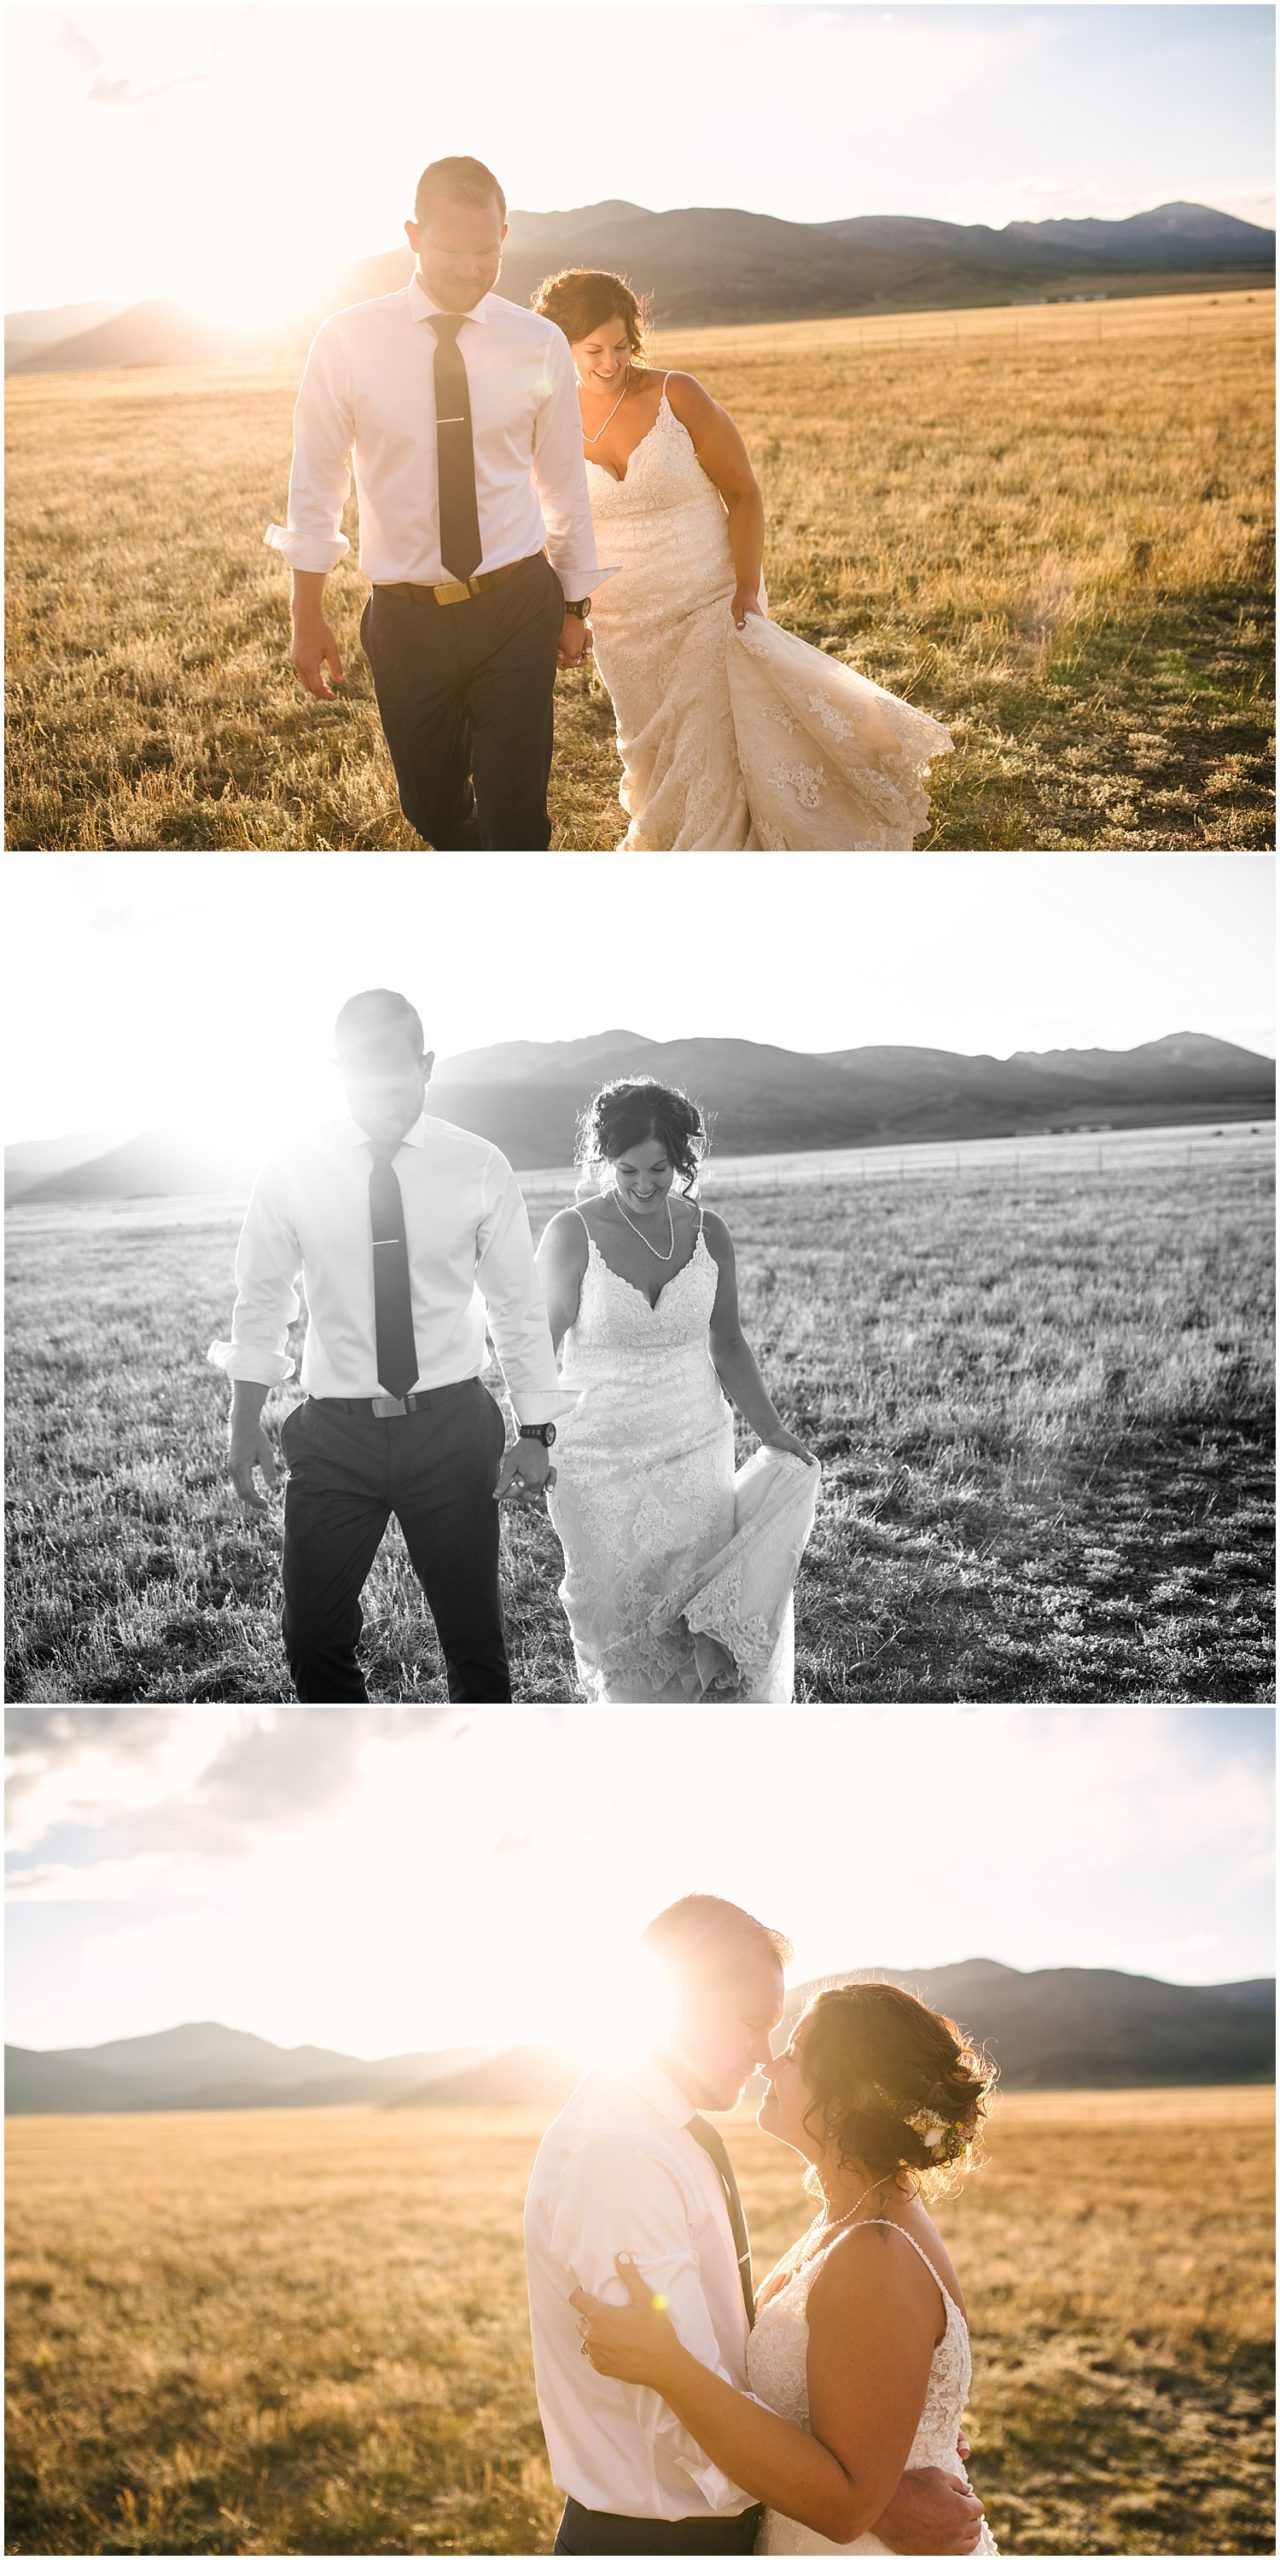 Bride and groom walking through a field in the mountains at golden hour